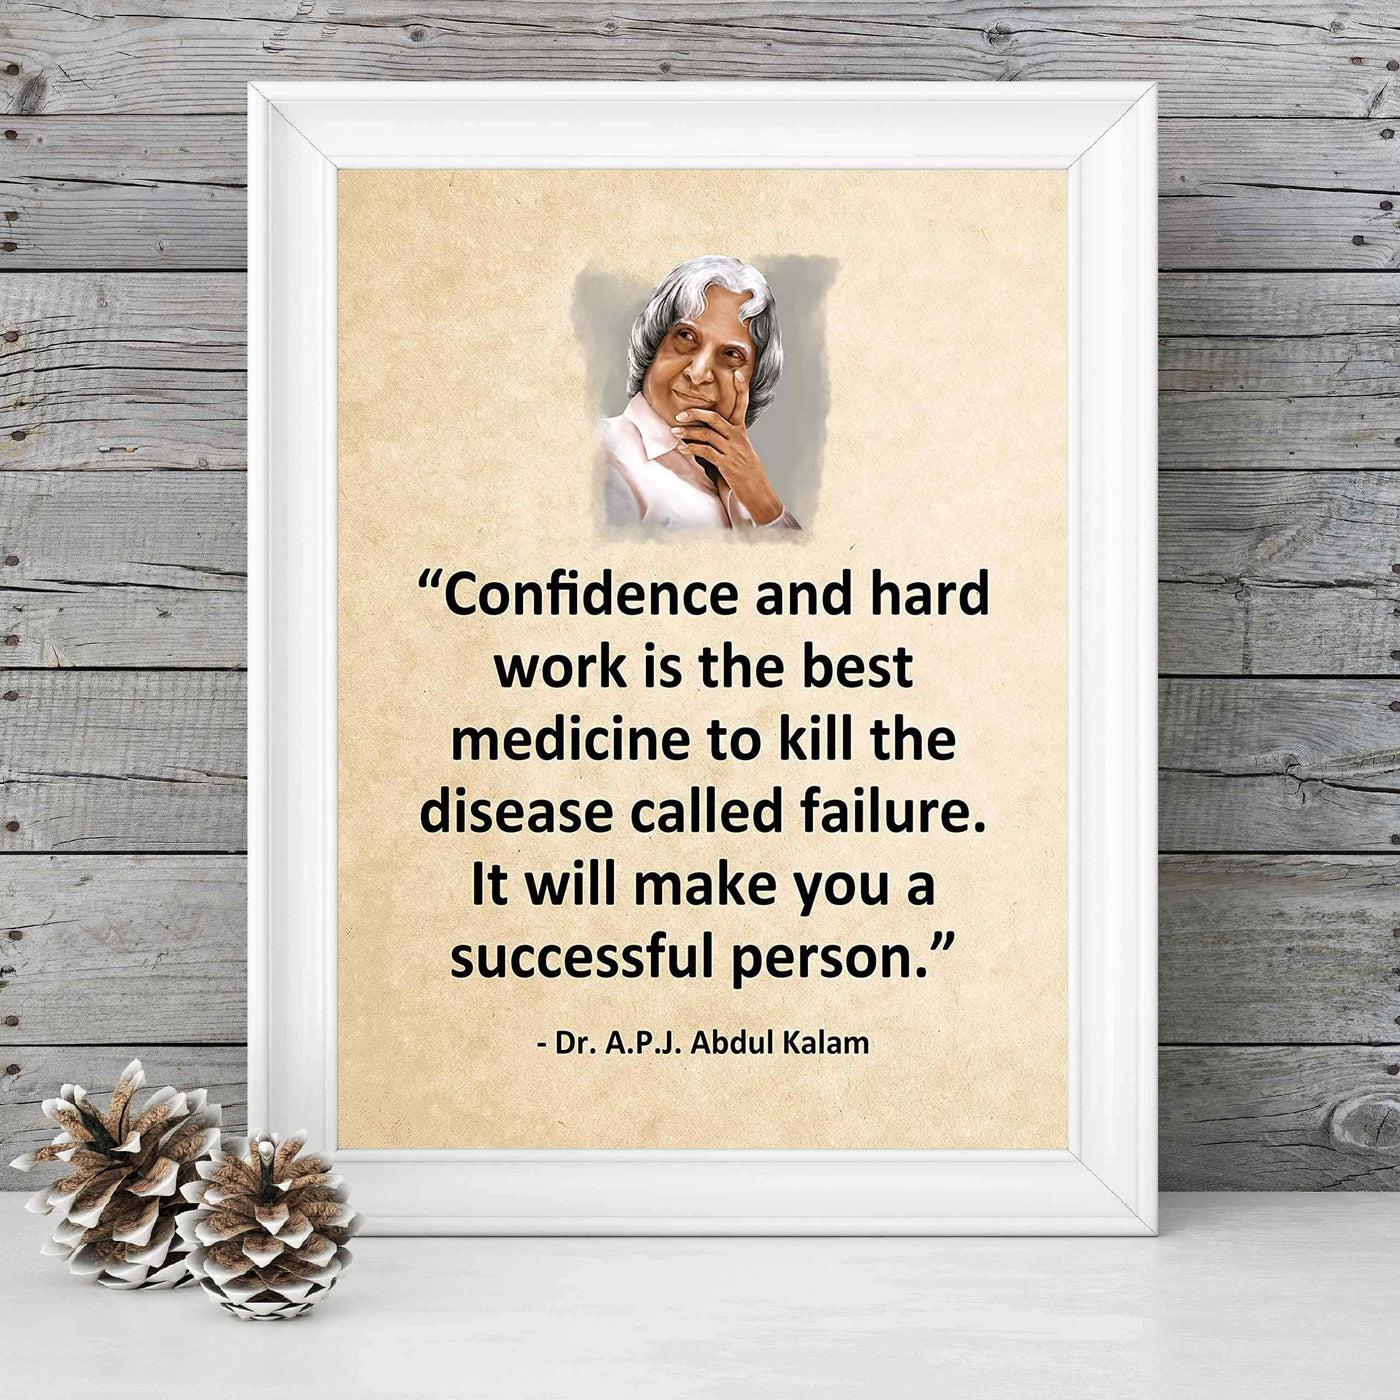 Confidence and Hard Work Will Make You Successful Motivational Quotes Wall Sign -8 x 10" Inspirational Wall Art Print-Ready to Frame. Positive Home-Office-School-Dorm Decor. Great Sign for Success!